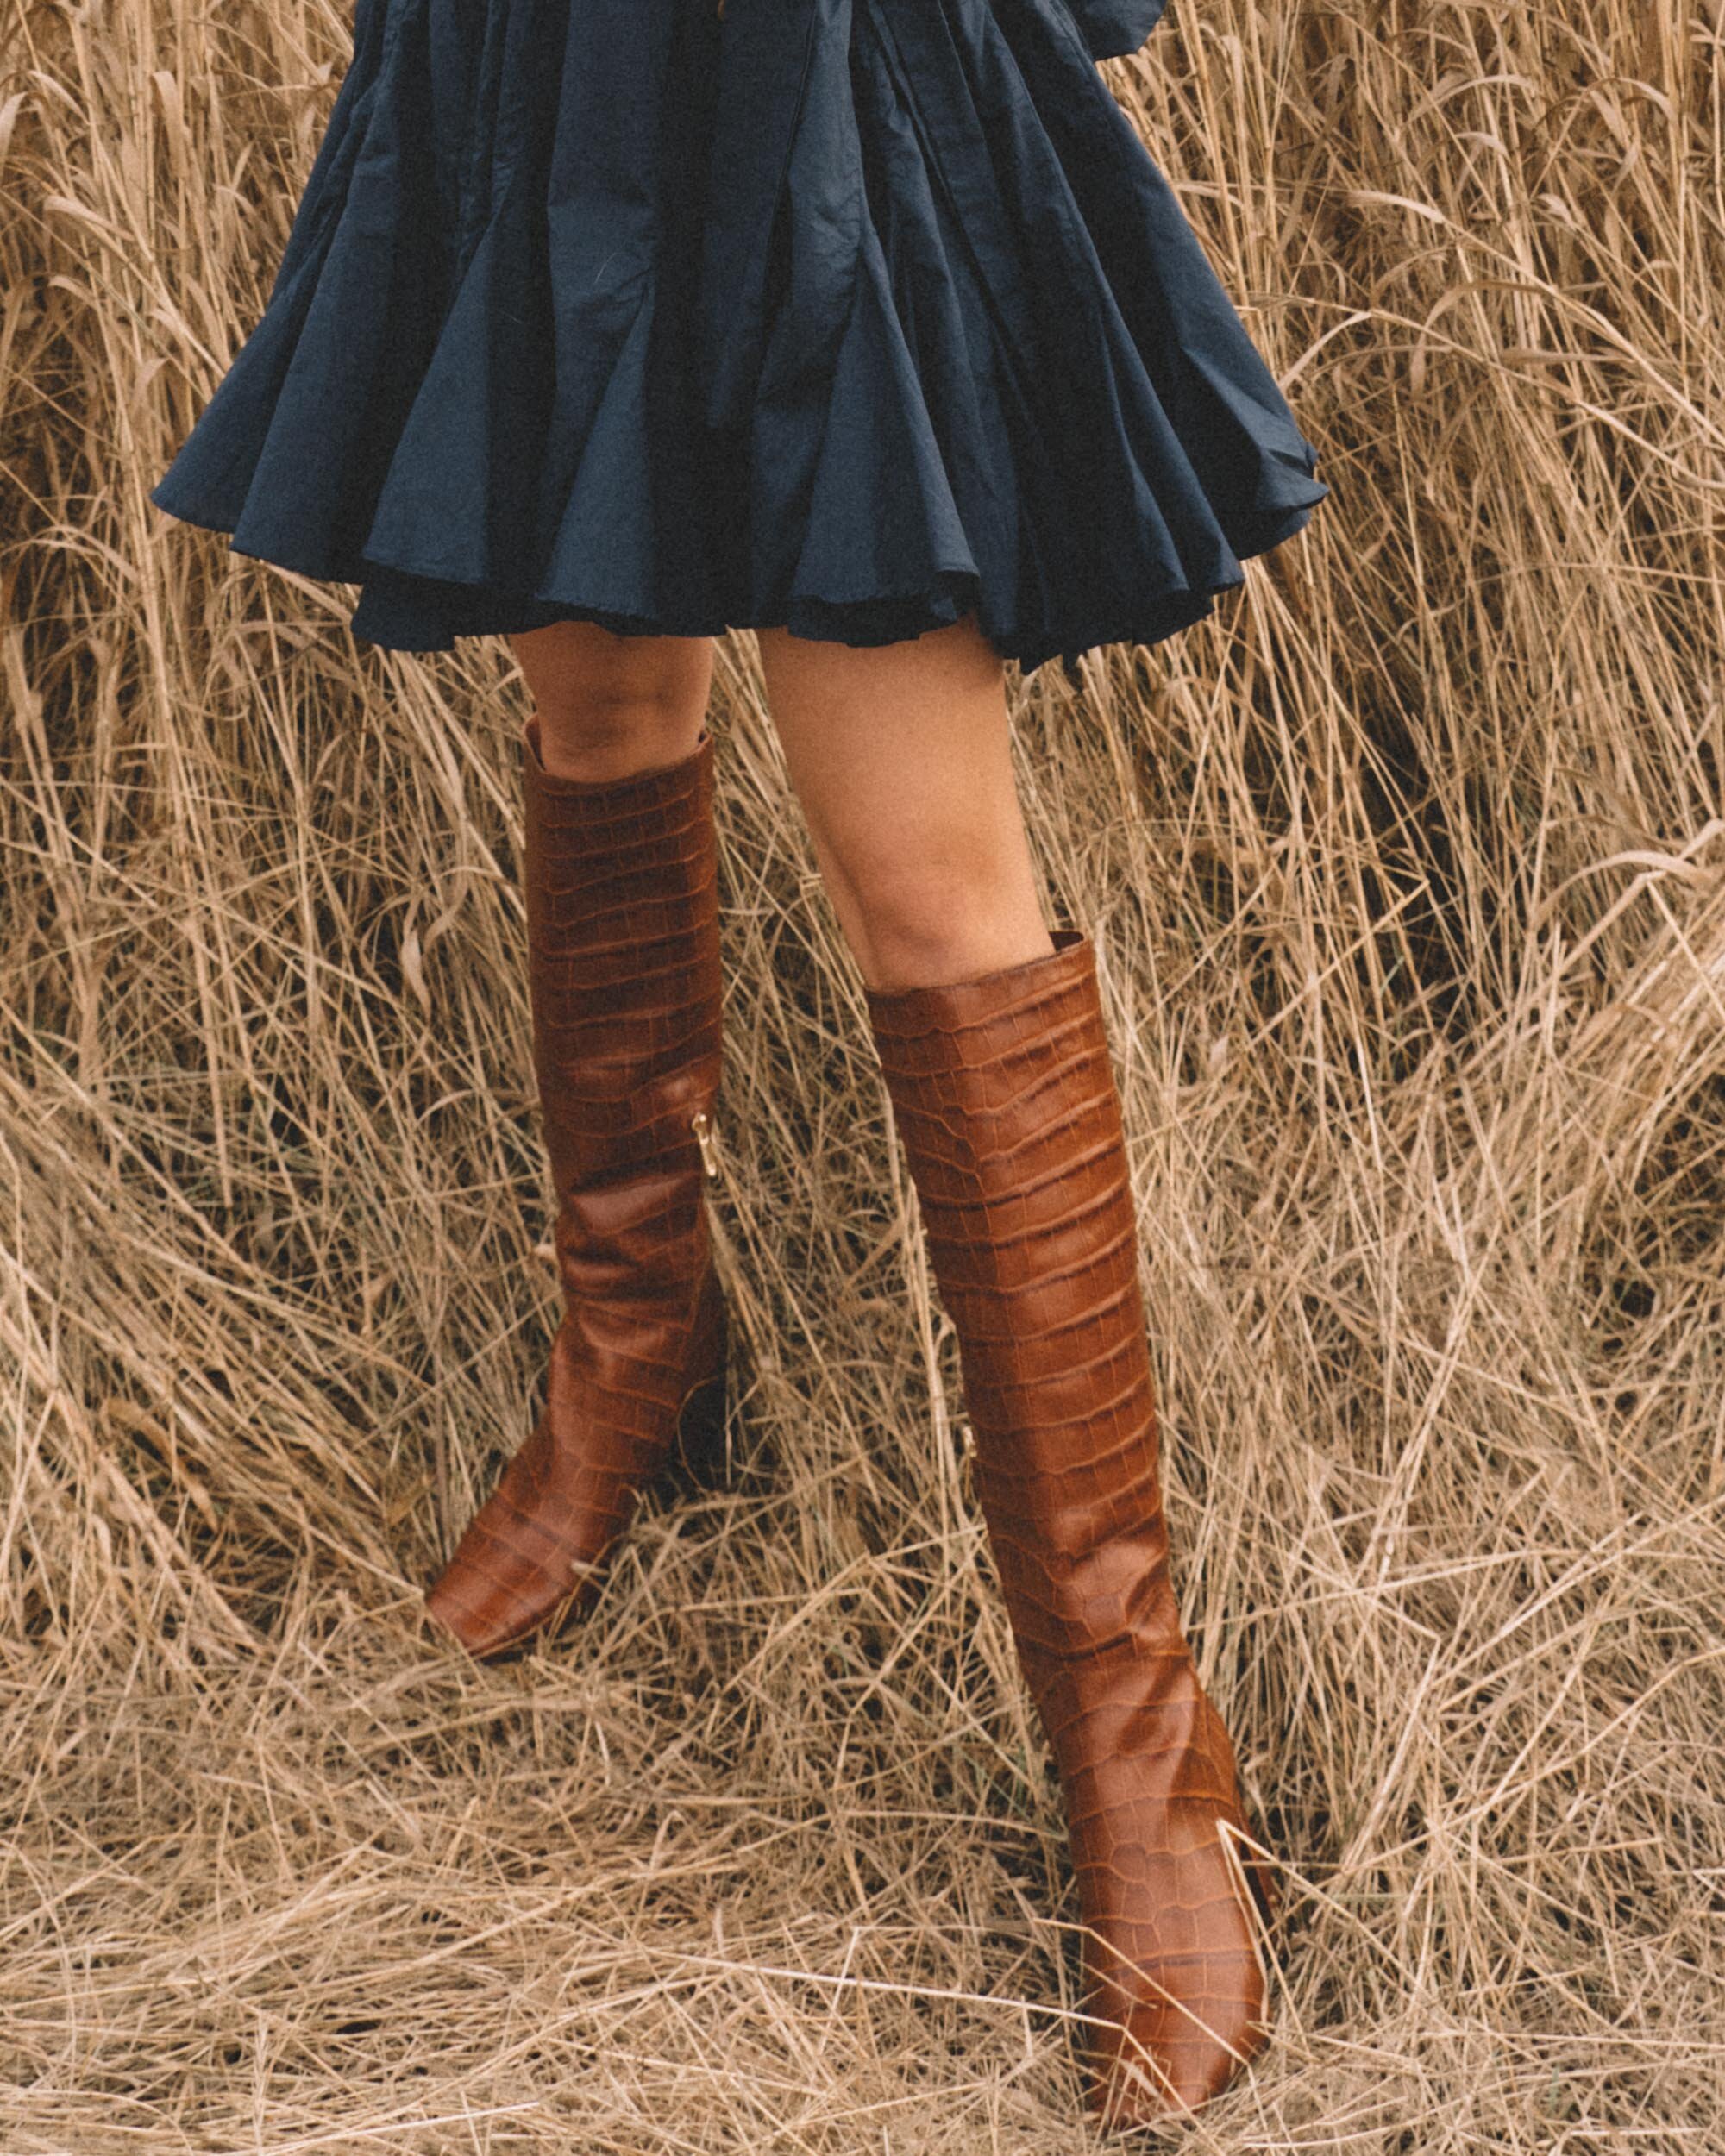 Chic Fall Dress Outfit. Sarah Butler of @sarahchristine wearing Rhode Emma Tie-Waist Flared Navy Dress and Brown Croc Knee High Boot in Seattle, Washington - -1.jpg